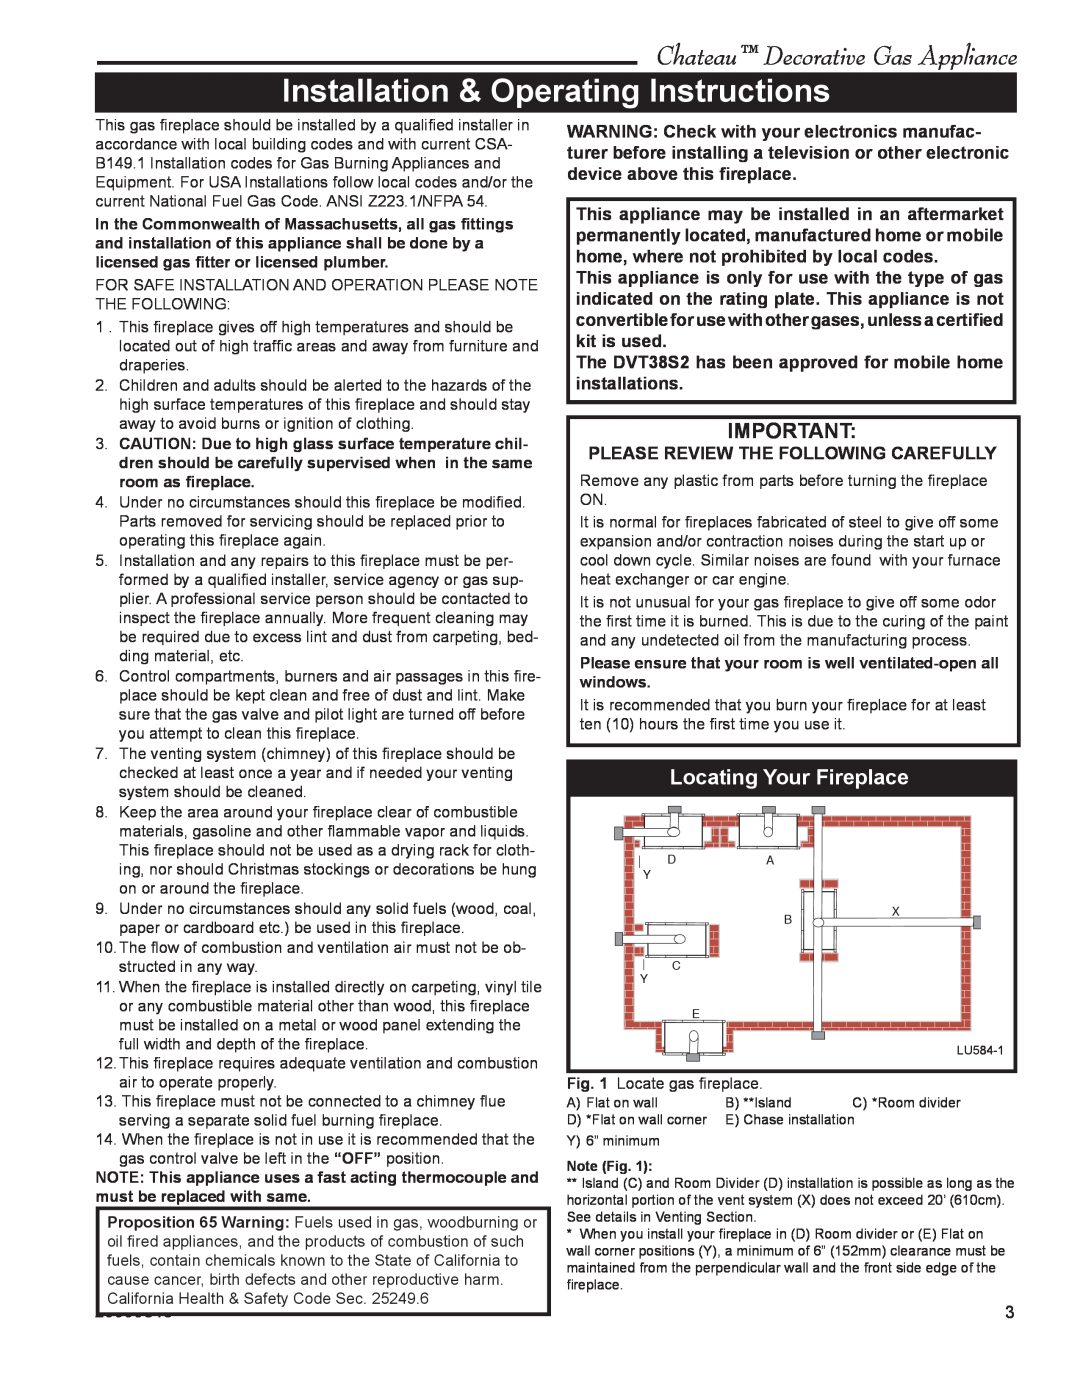 Vermont Casting DVT38S2 Installation & Operating Instructions, Locating Your Fireplace, Chateau Decorative Gas Appliance 